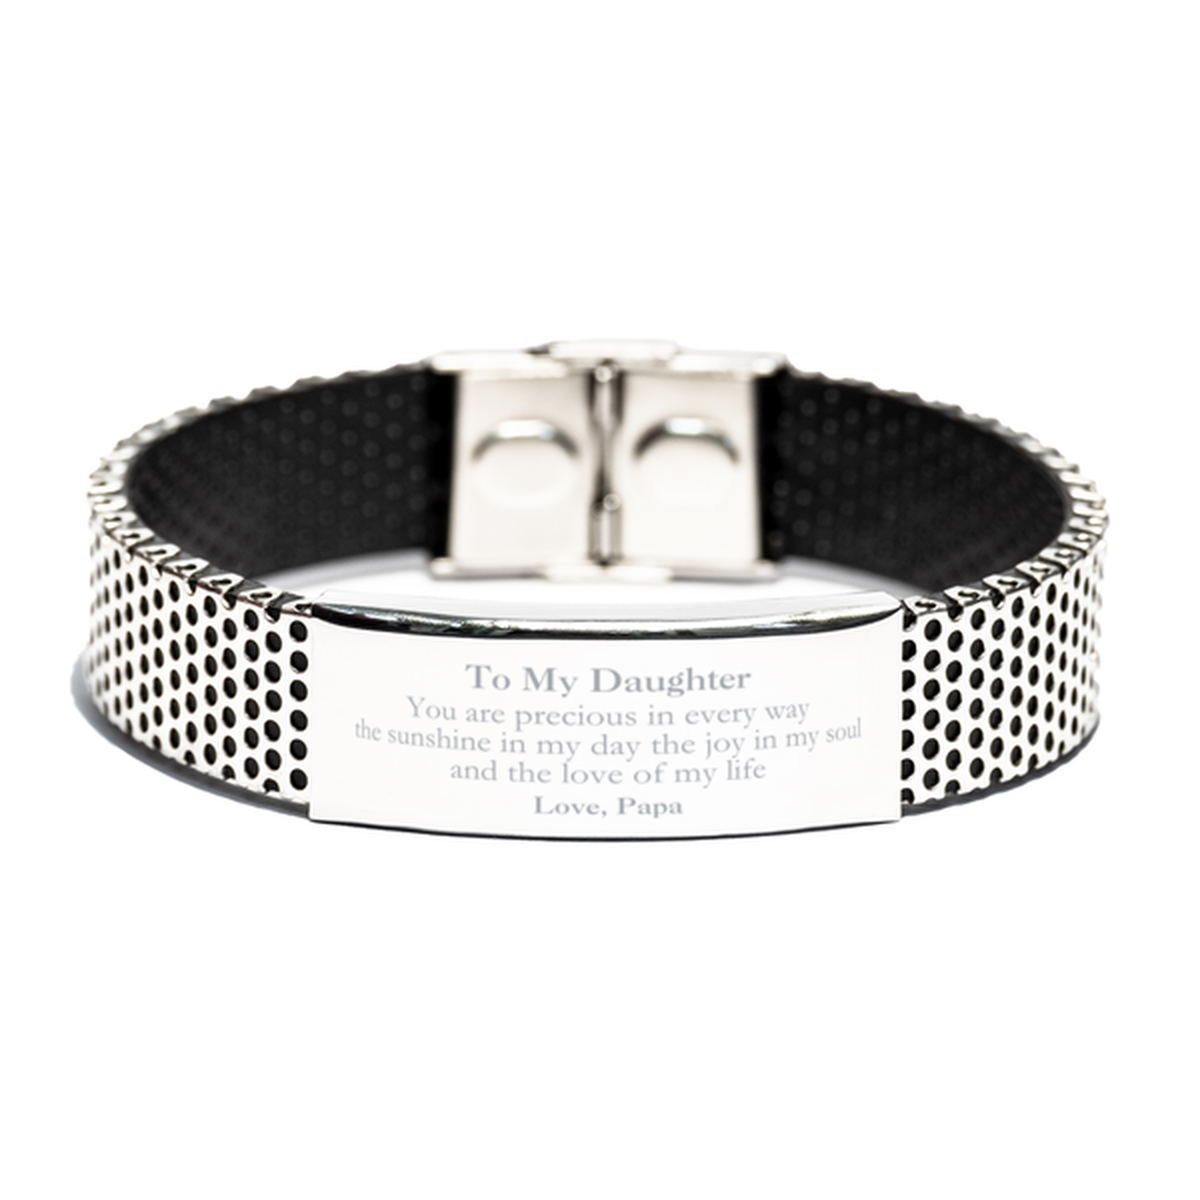 Graduation Gifts for Daughter Stainless Steel Bracelet Present from Papa, Christmas Daughter Birthday Gifts Daughter You are precious in every way the sunshine in my day. Love, Papa